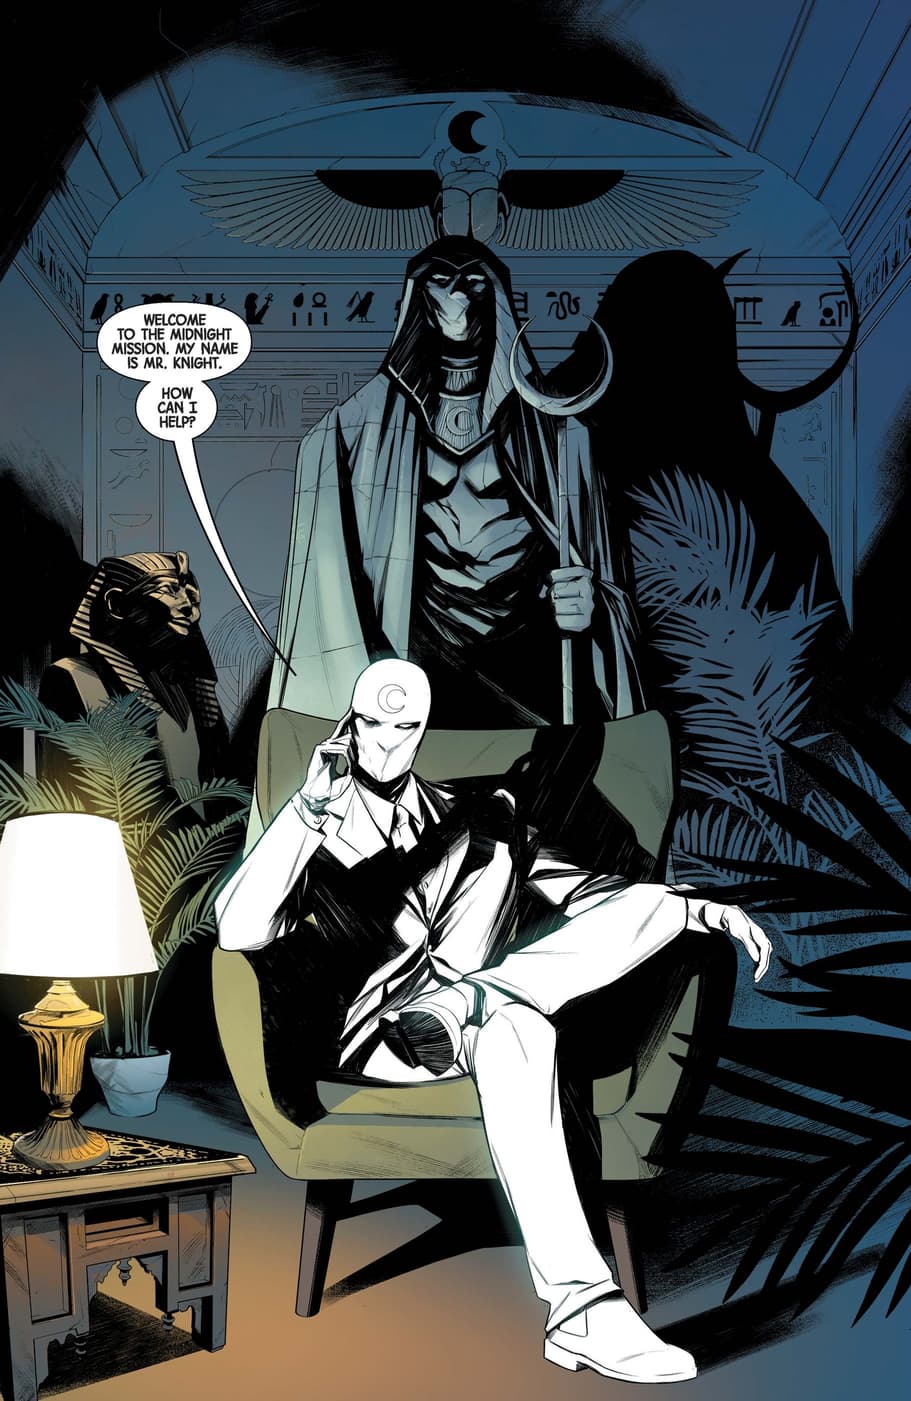 Mr. Knight presides over the Midnight Mission in MOON KNIGHT (2021) #1.